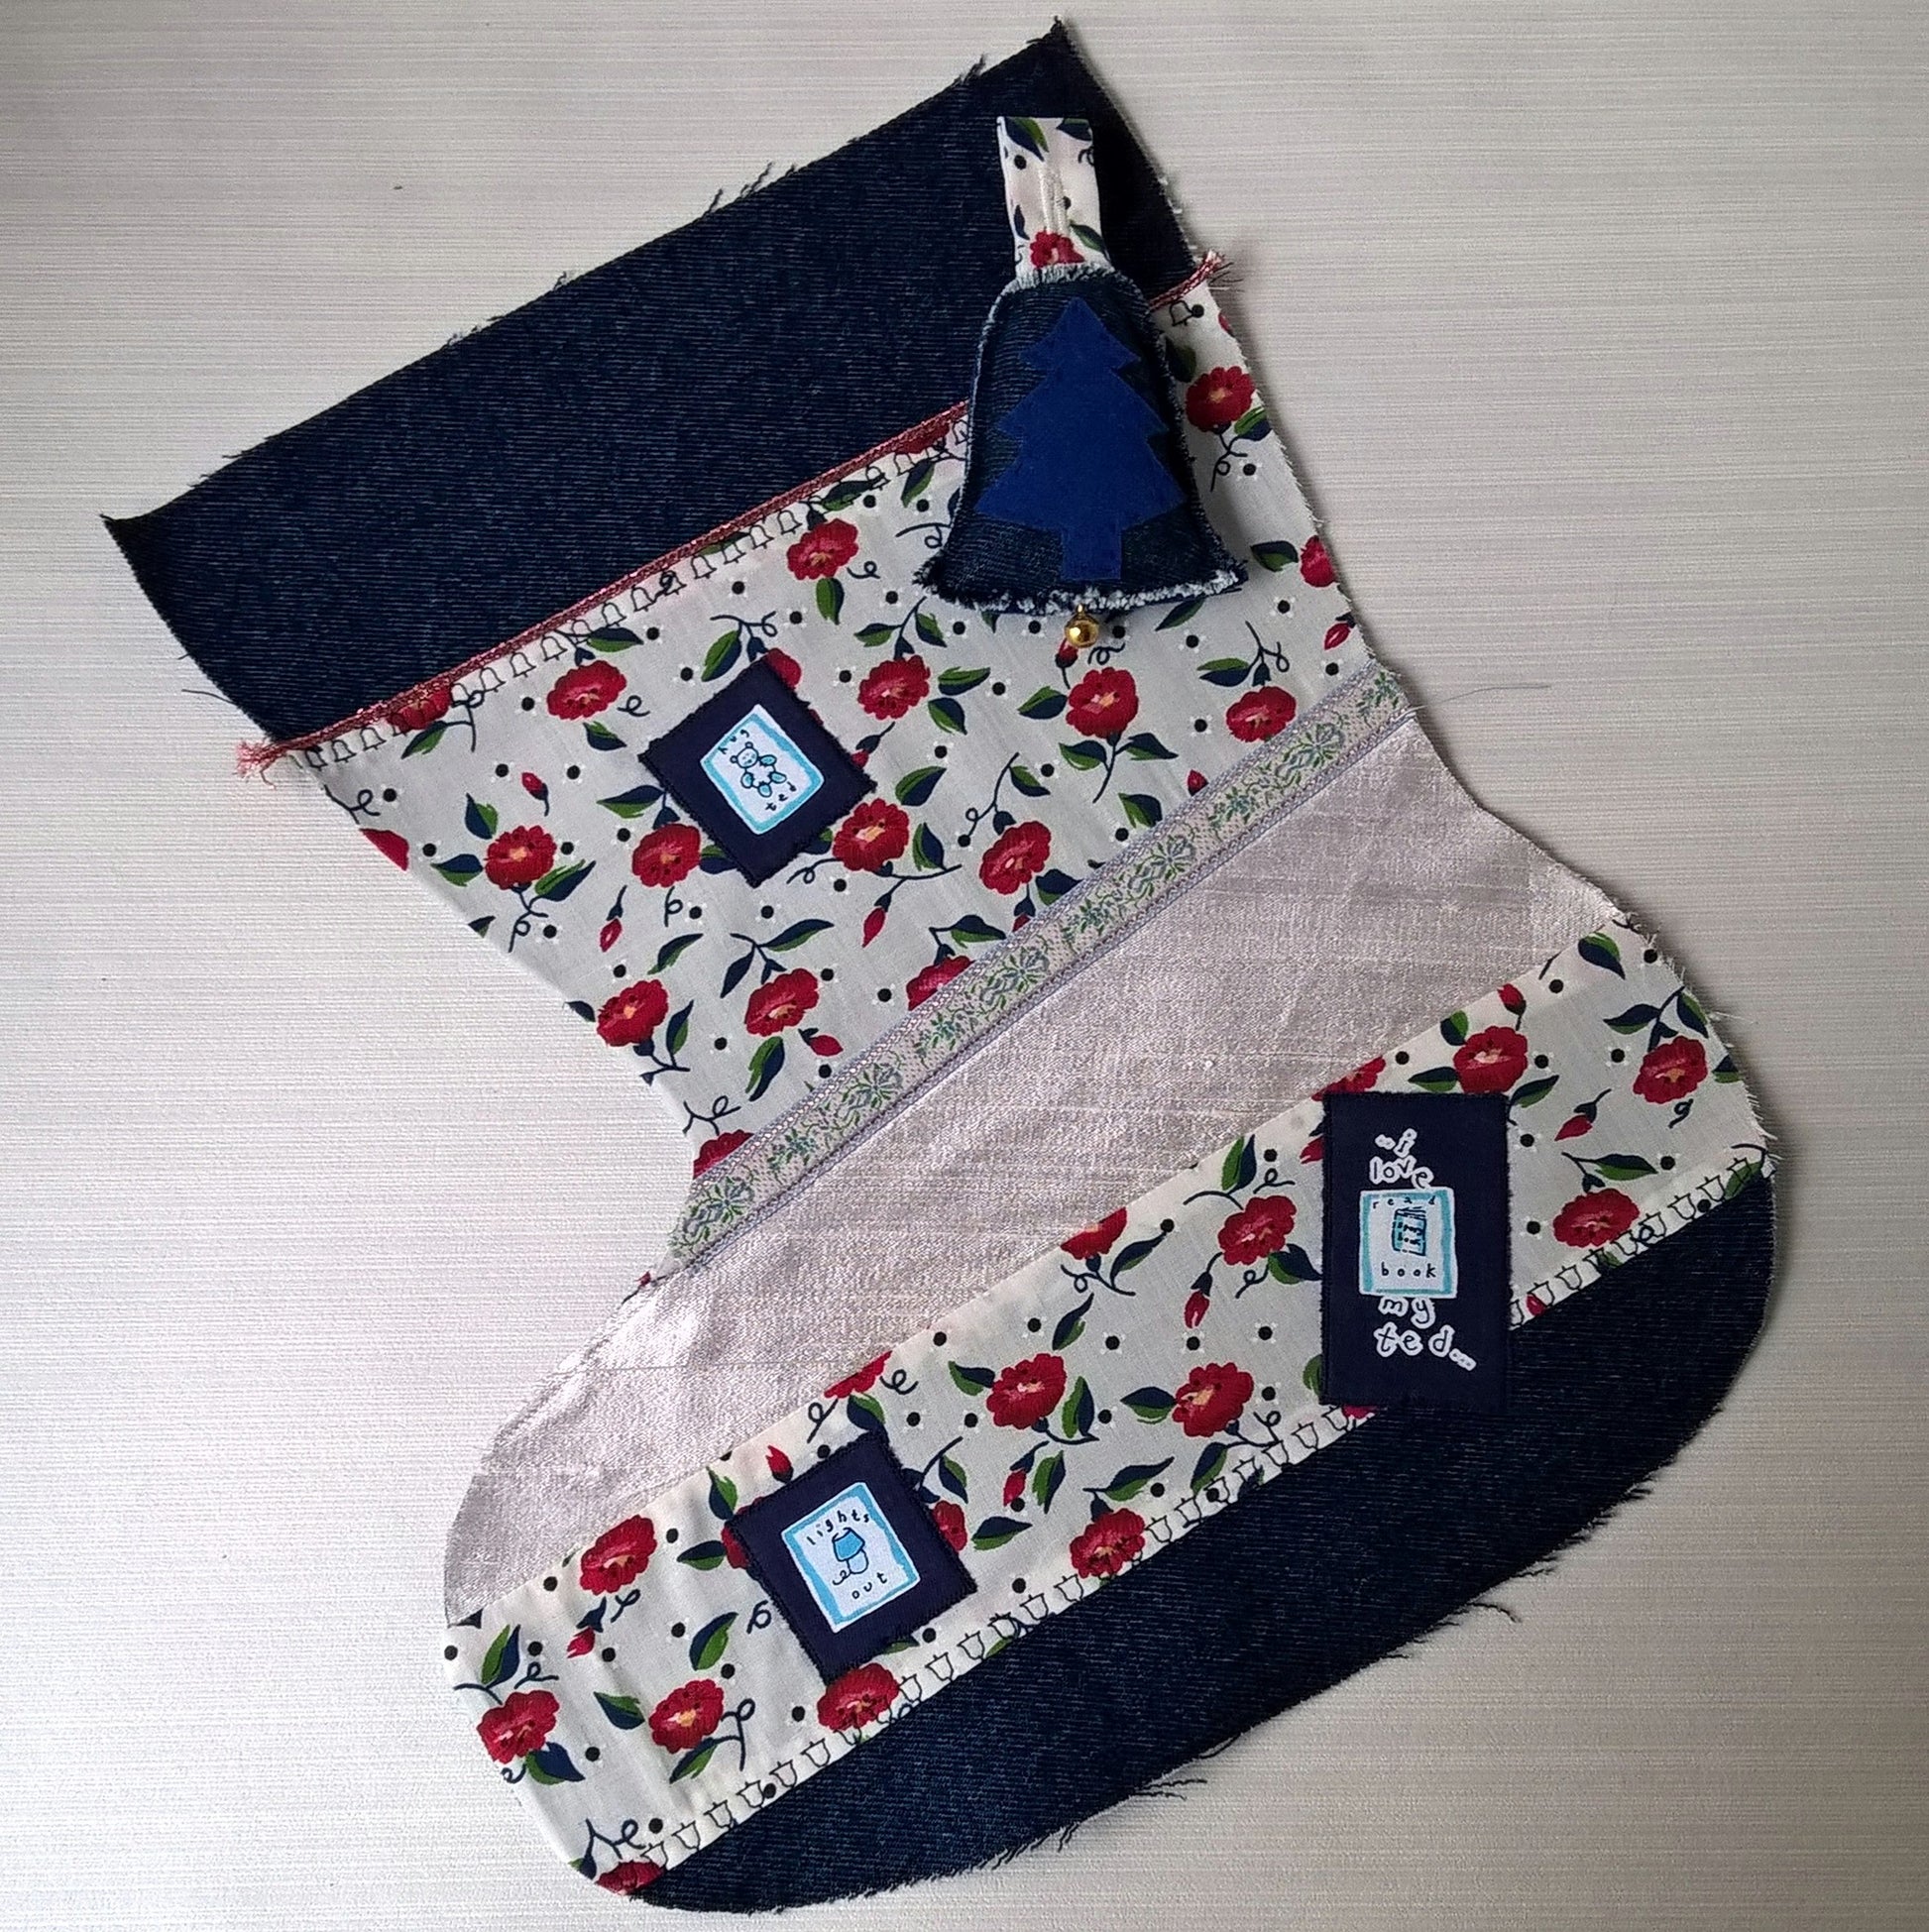 The centre panel on the stocking is pure silk, and provides the perfect base for personalized embroidered name